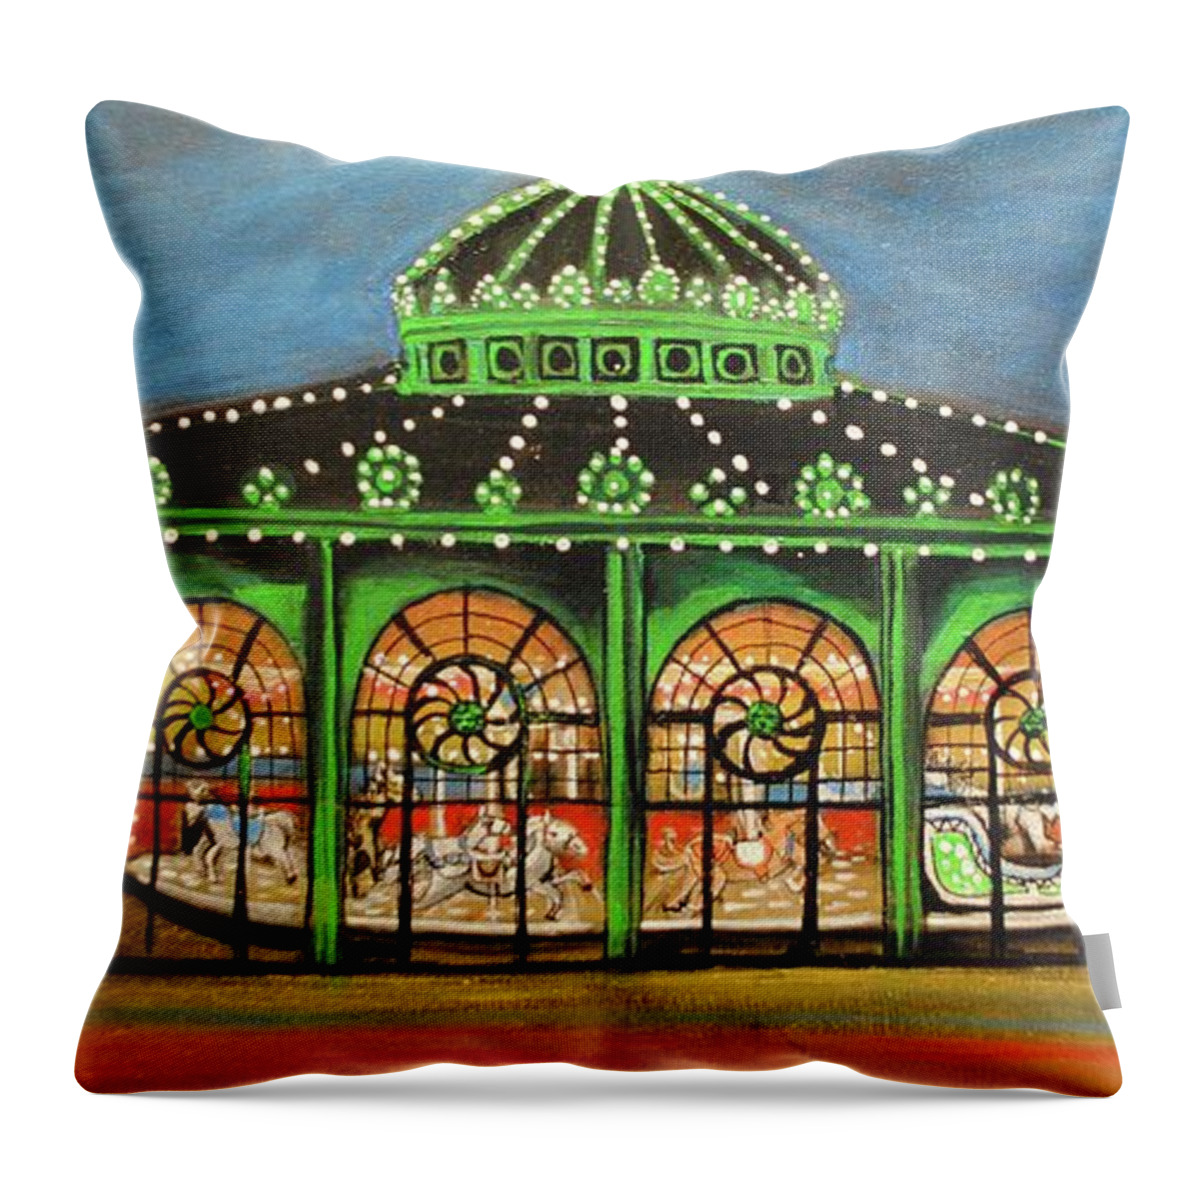 Asbury Park Throw Pillow featuring the painting The Carousel of Asbury Park by Patricia Arroyo